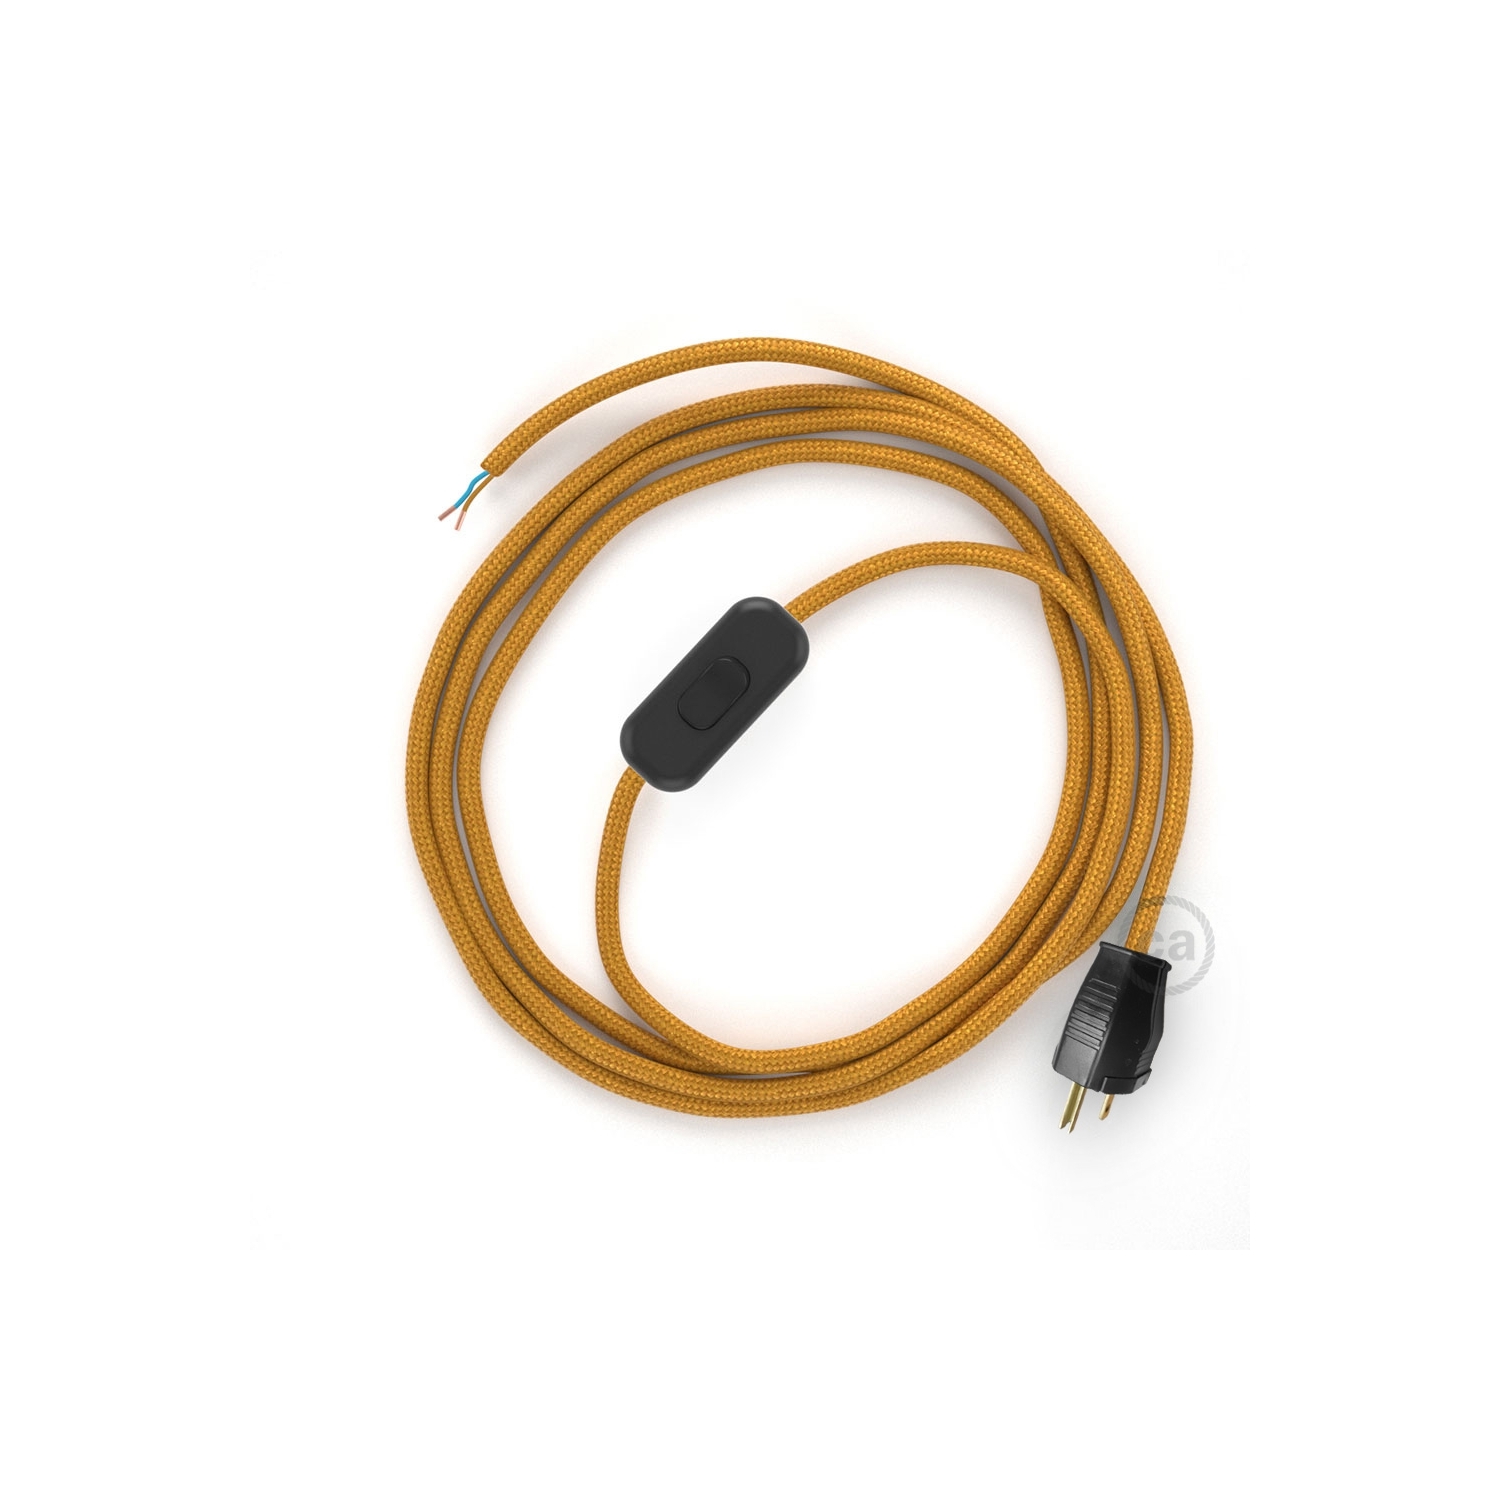 Power Cord with in-line switch, RM05 Gold Rayon - Choose color of switch/plug